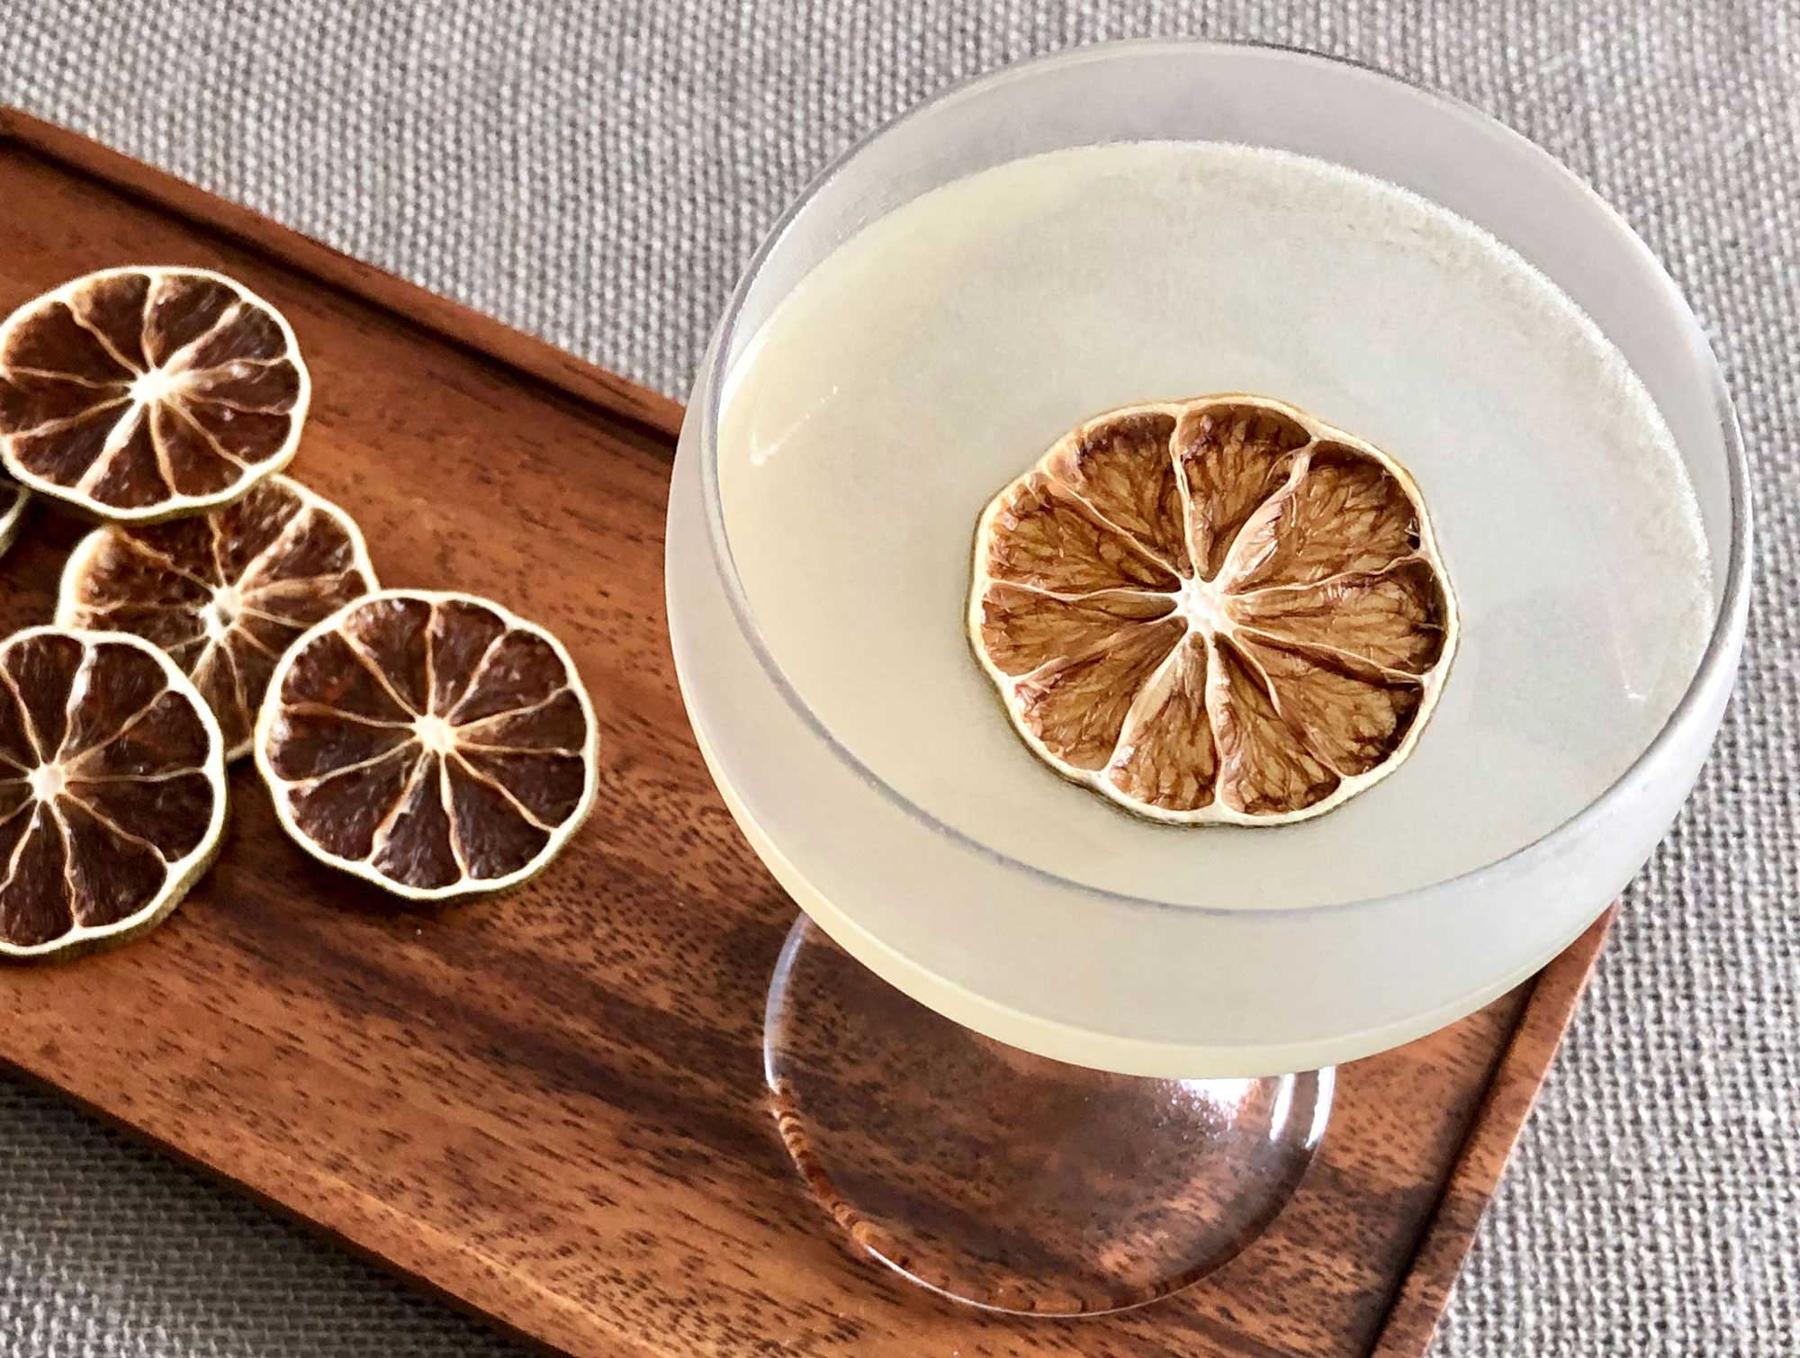 An example of the Last Run, the mixed drink (drink) featuring Dolin Génépy le Chamois Liqueur, Hayman’s London Dry Gin, maraschino liqueur, and lime juice; photo by Lee Edwards